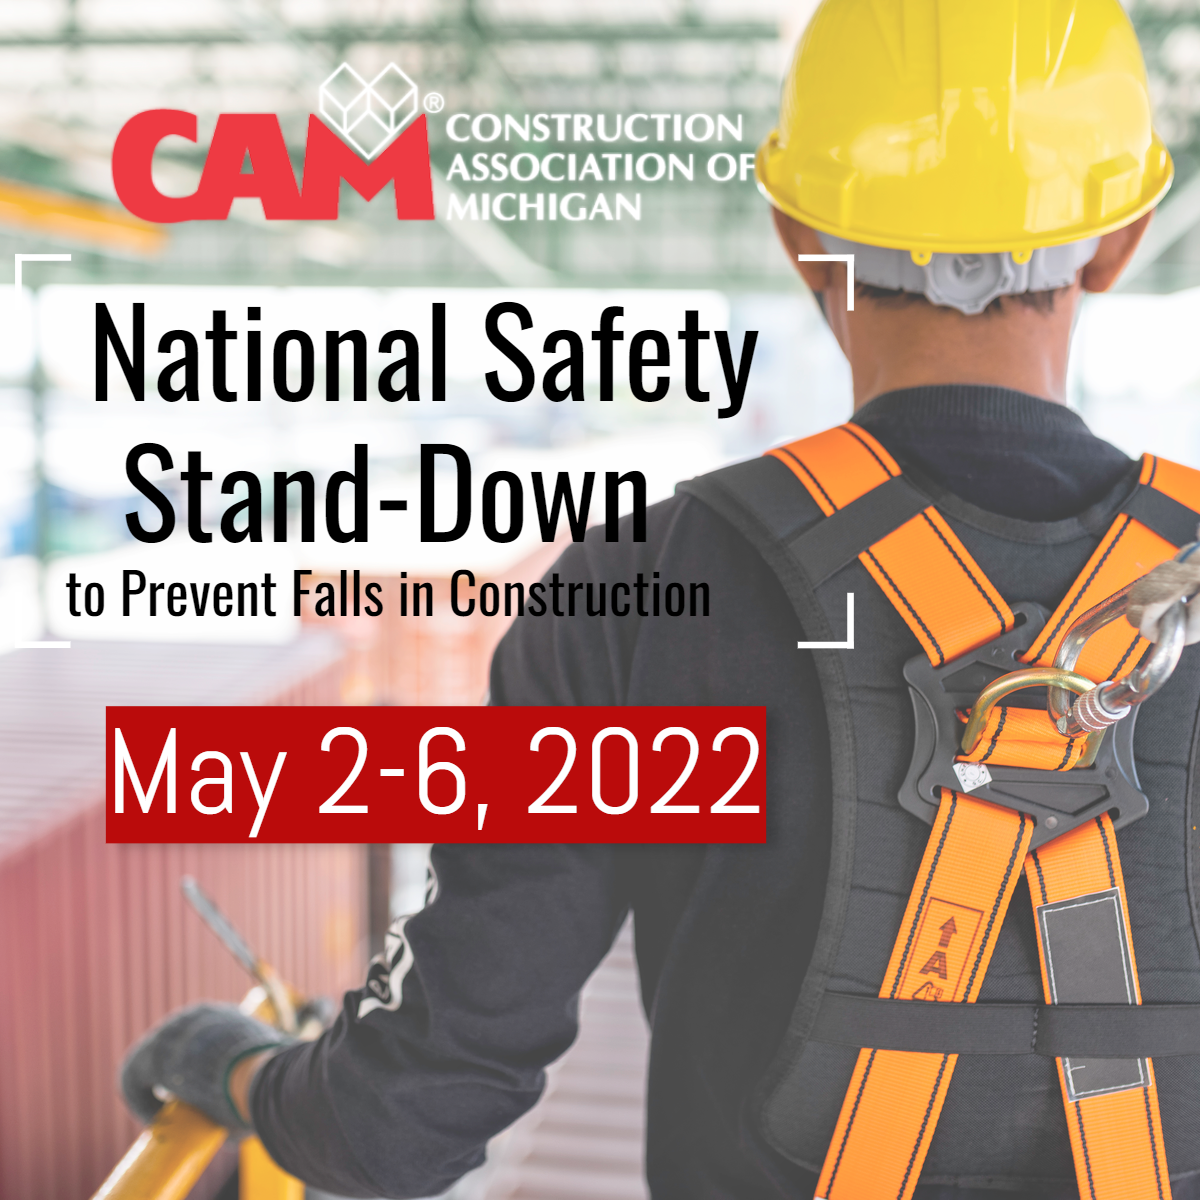 National Safety Stand-Down to Prevent Falls